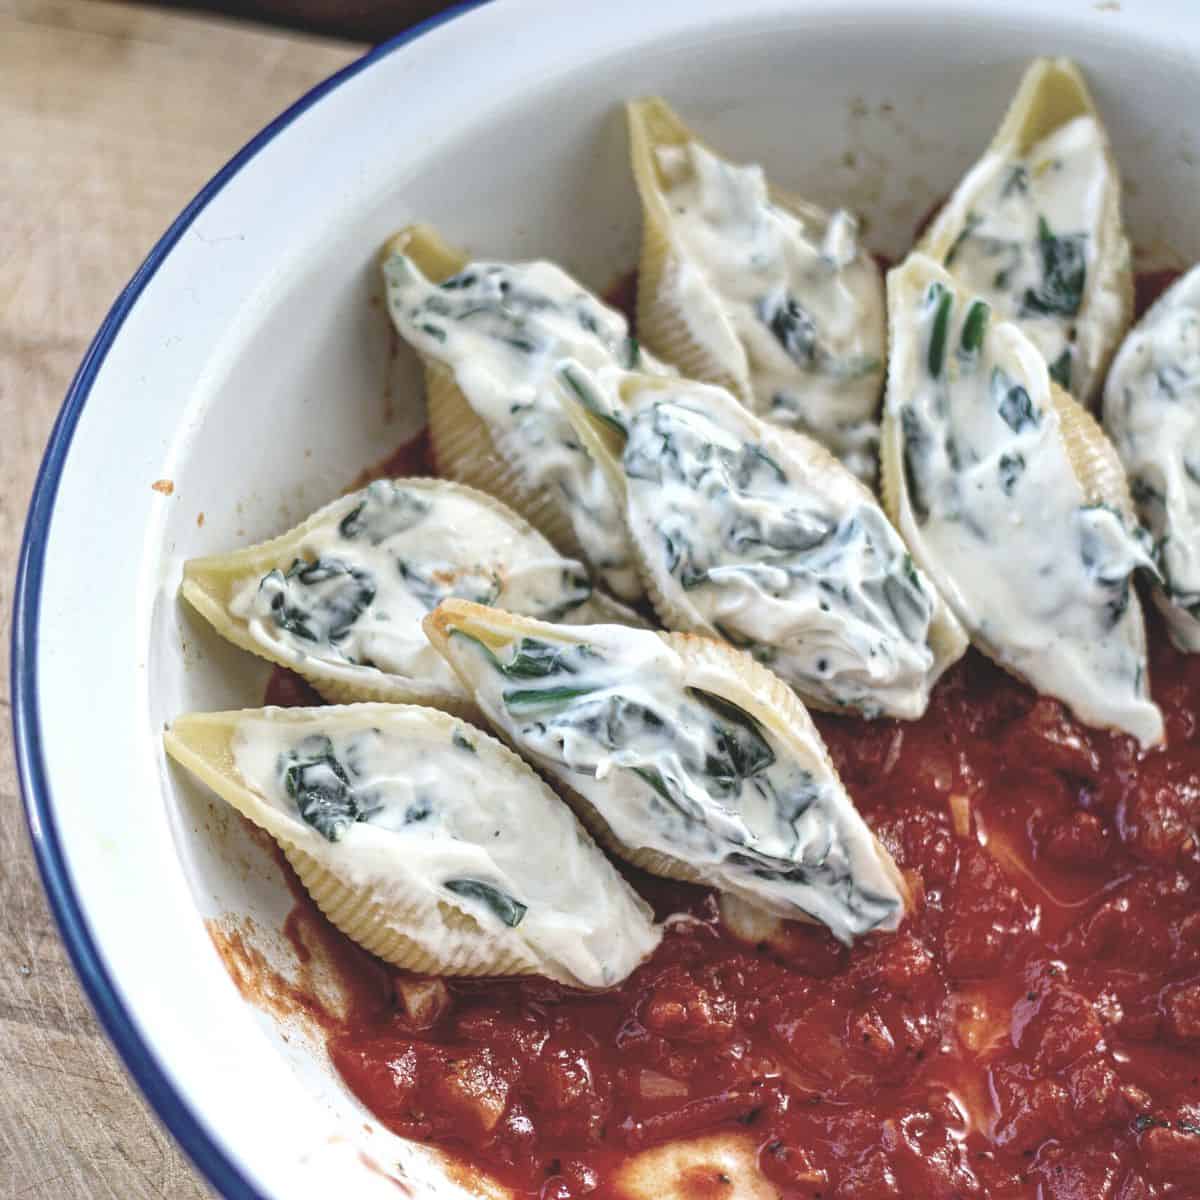 Vegan Stuffed Pasta Shells with Spinach, Cream Cheese and Tomato Sauce – a simple delicious supper dish!